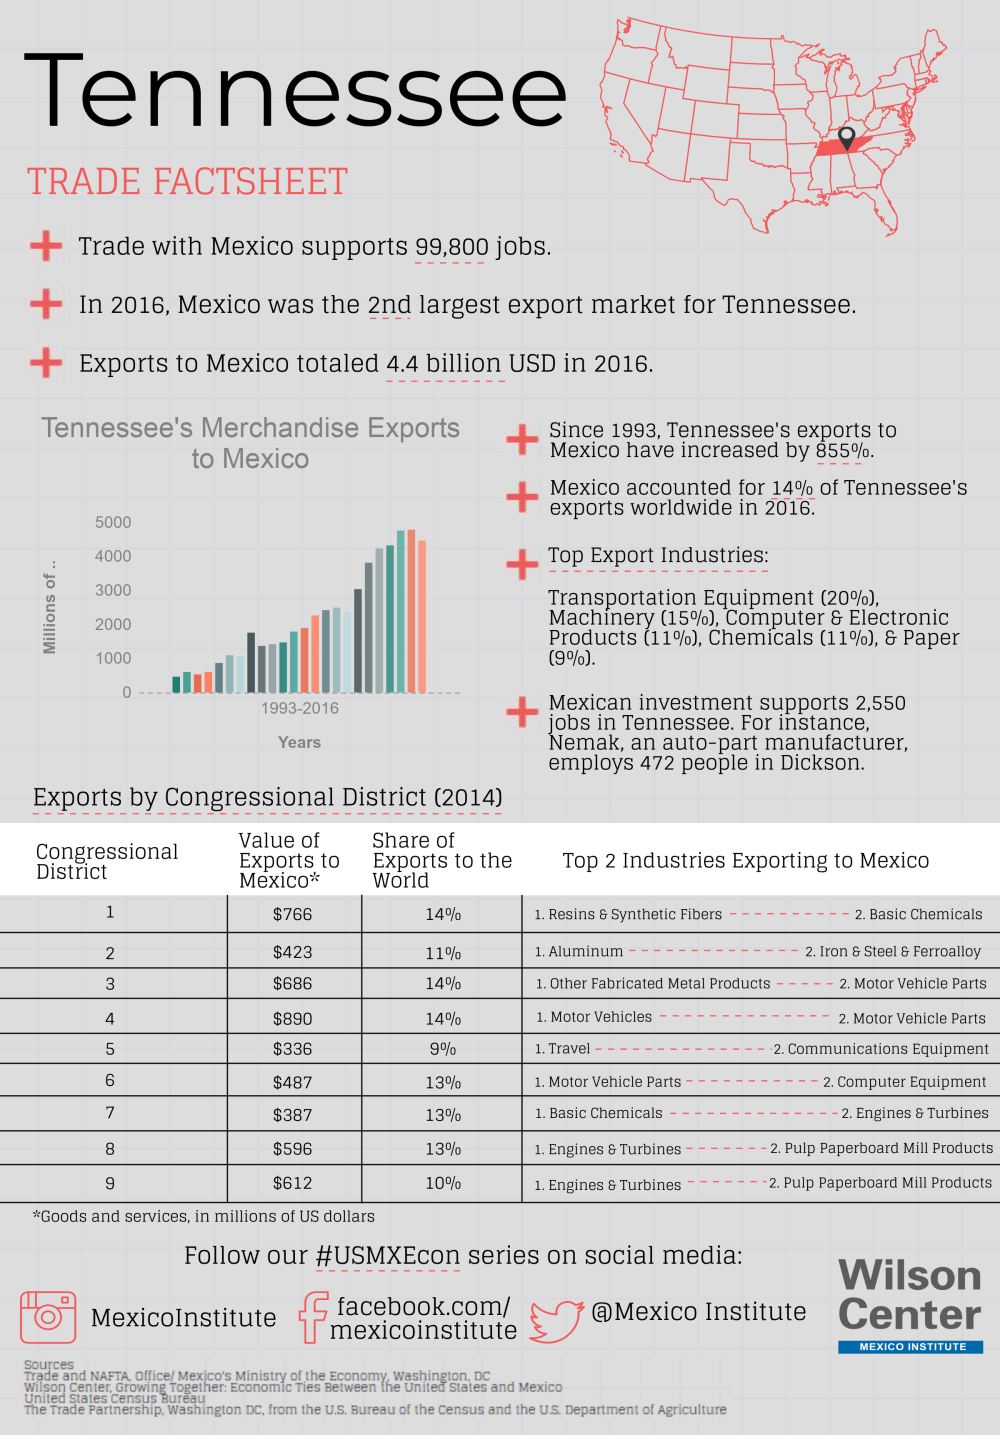 Growing Together: Tennessee Factsheet